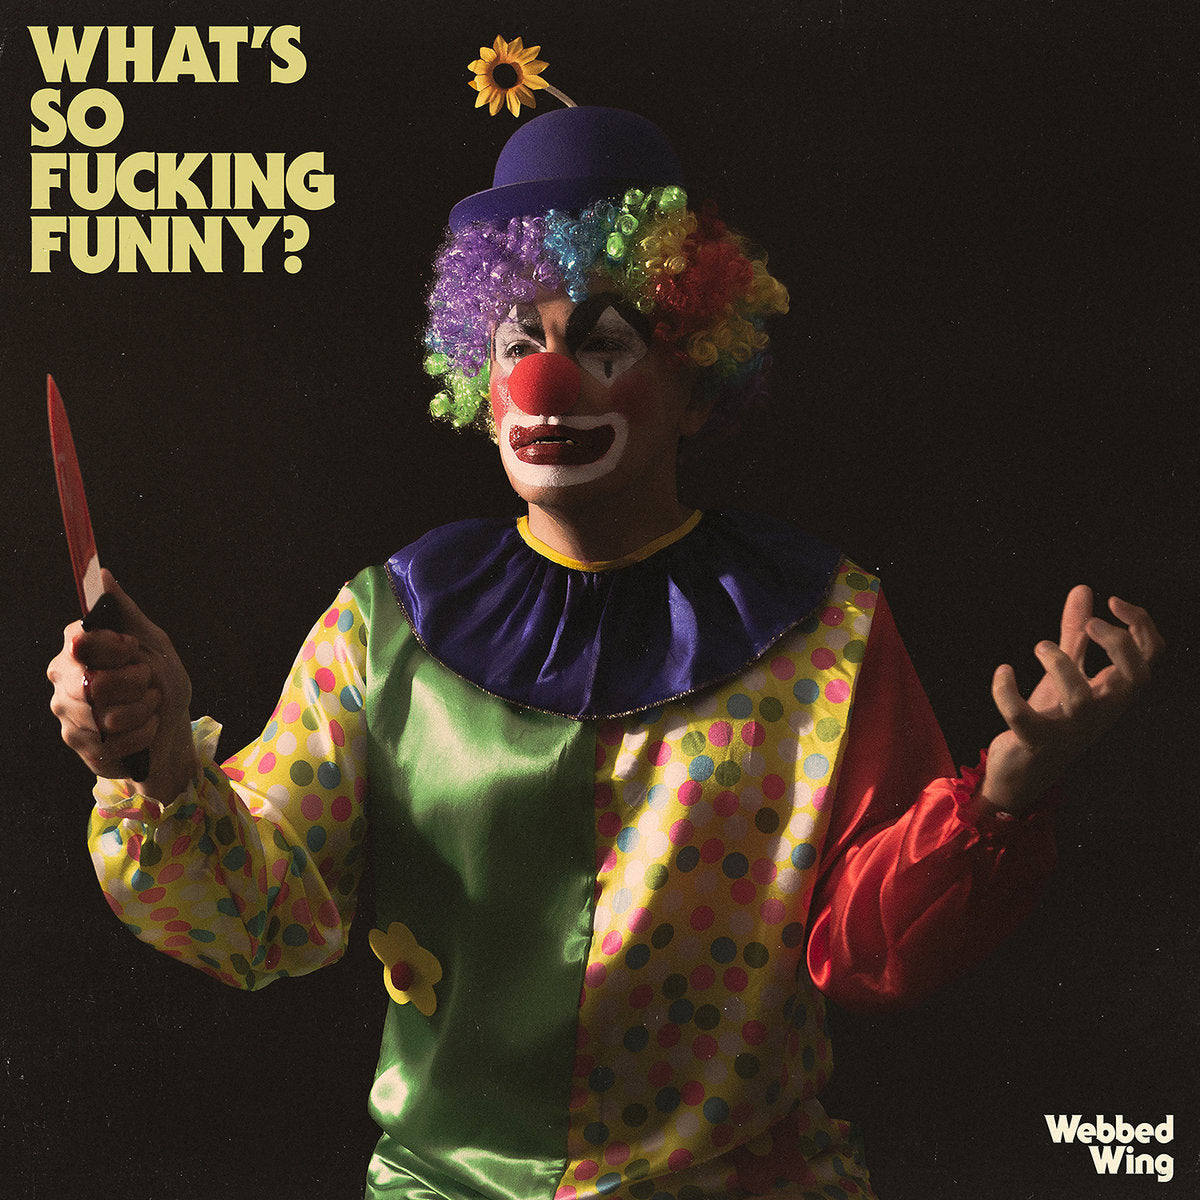 Webbed Wing "What's So Fucking Funny?" 12" Vinyl